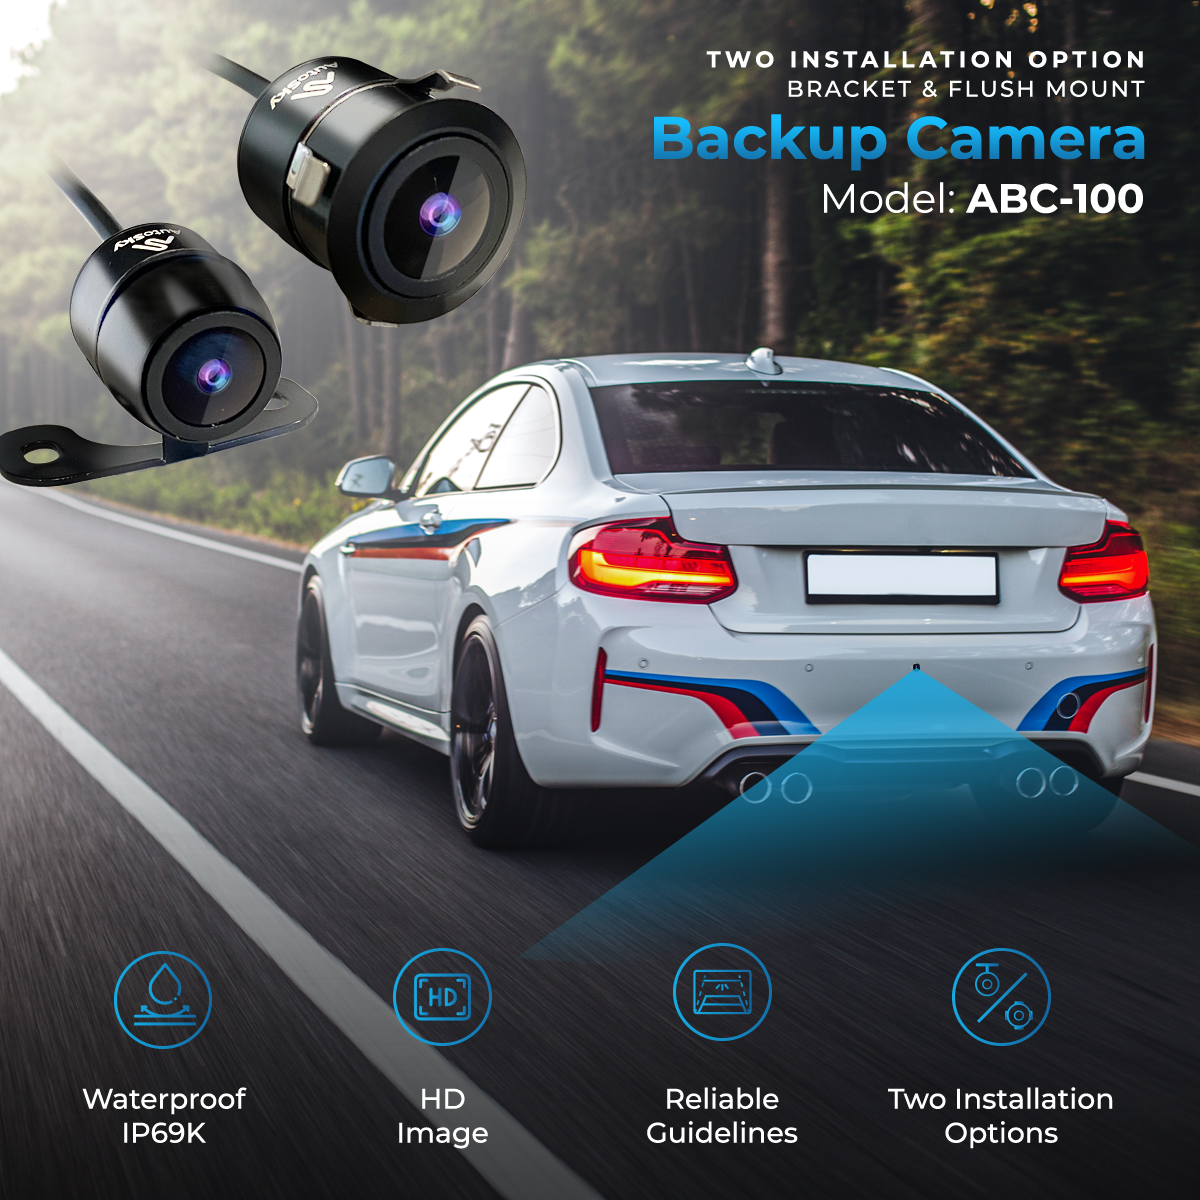 AutoSky HD Dash Cam Front and Rear - AutoSky